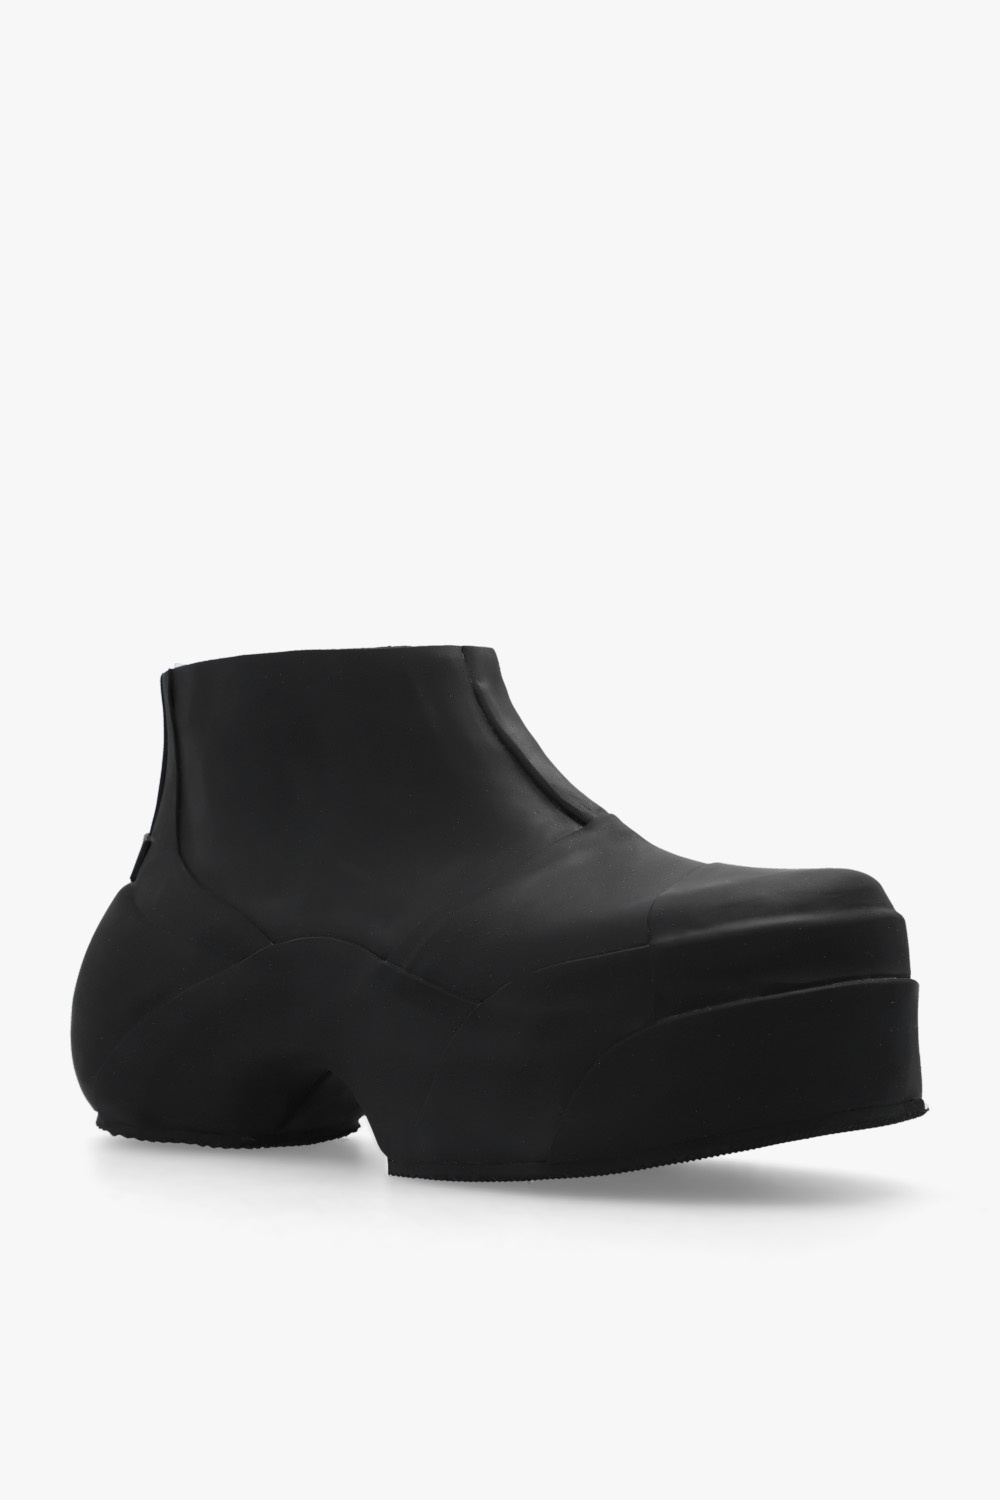 Givenchy Rainproof ankle boots